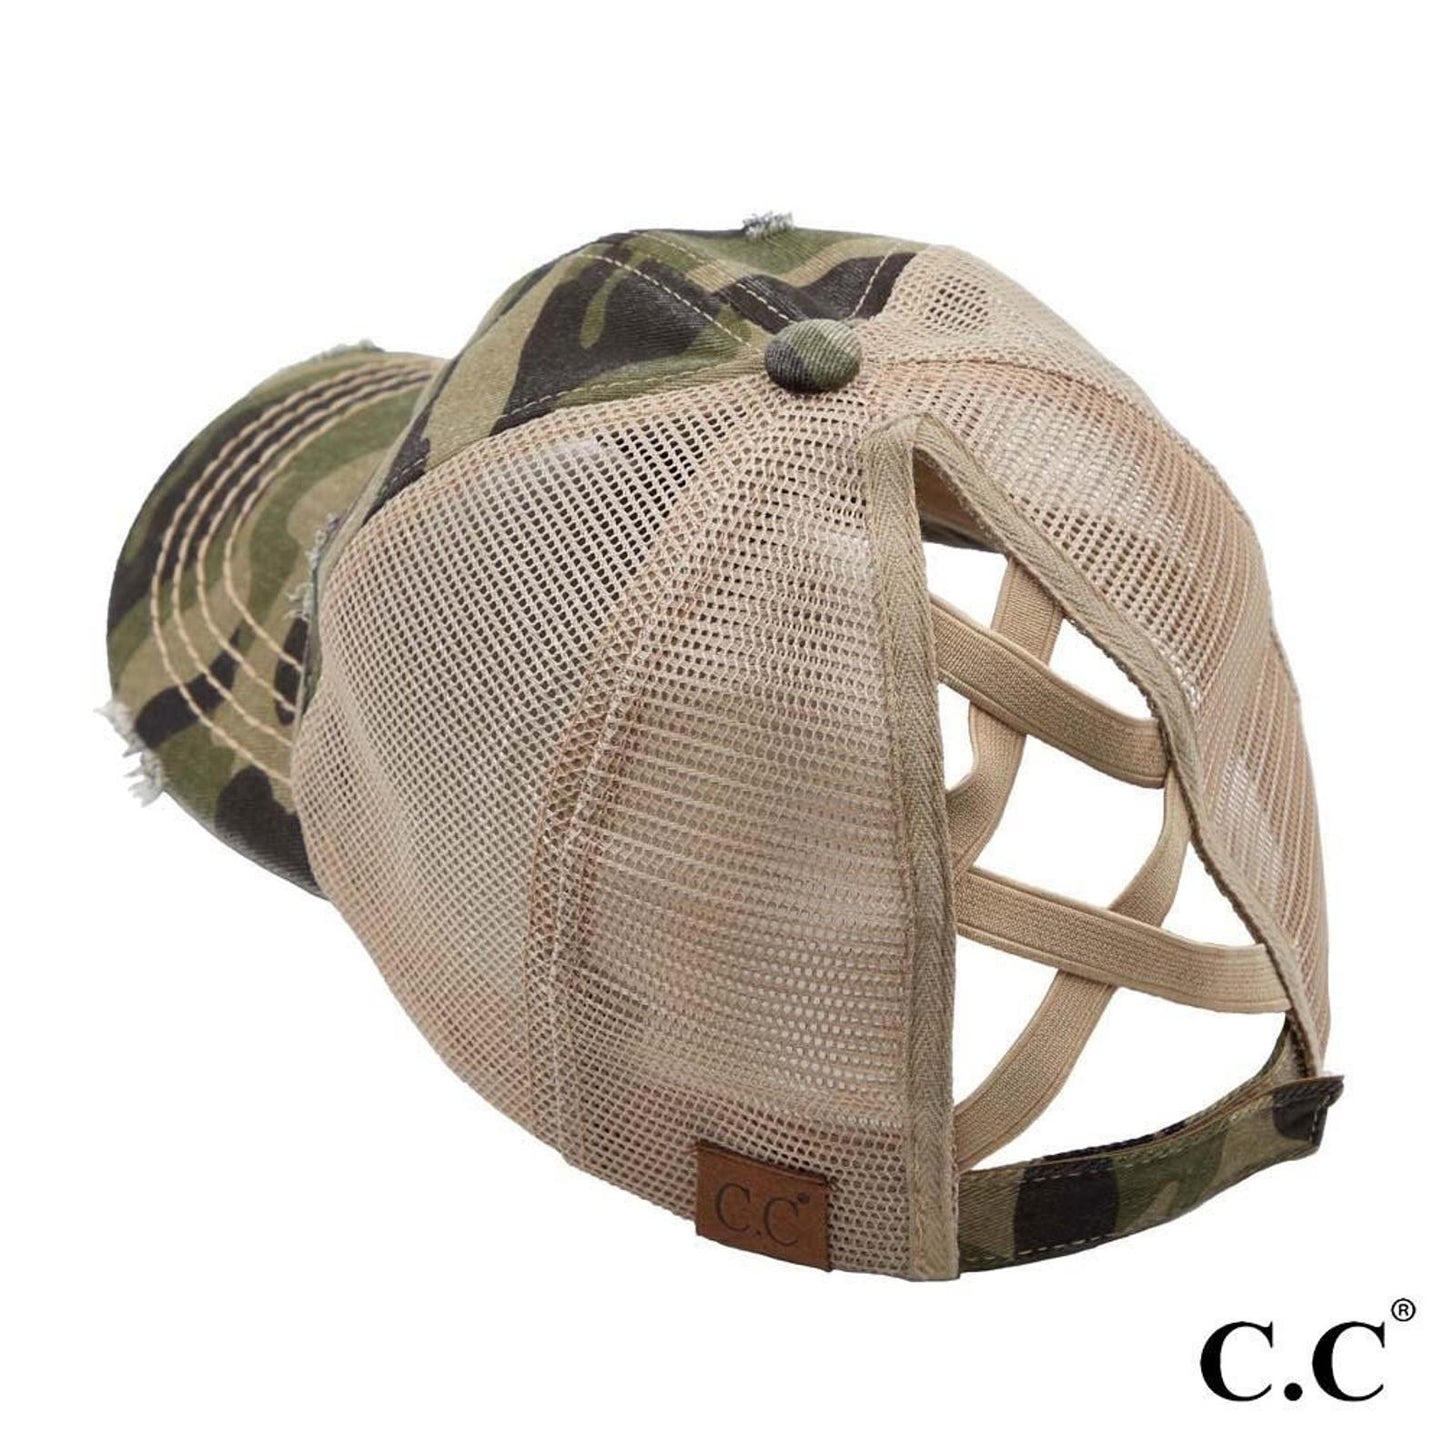 Camouflage Criss-Cross High Ponytail Ball Cap. Olive camouflage with beige mesh back.